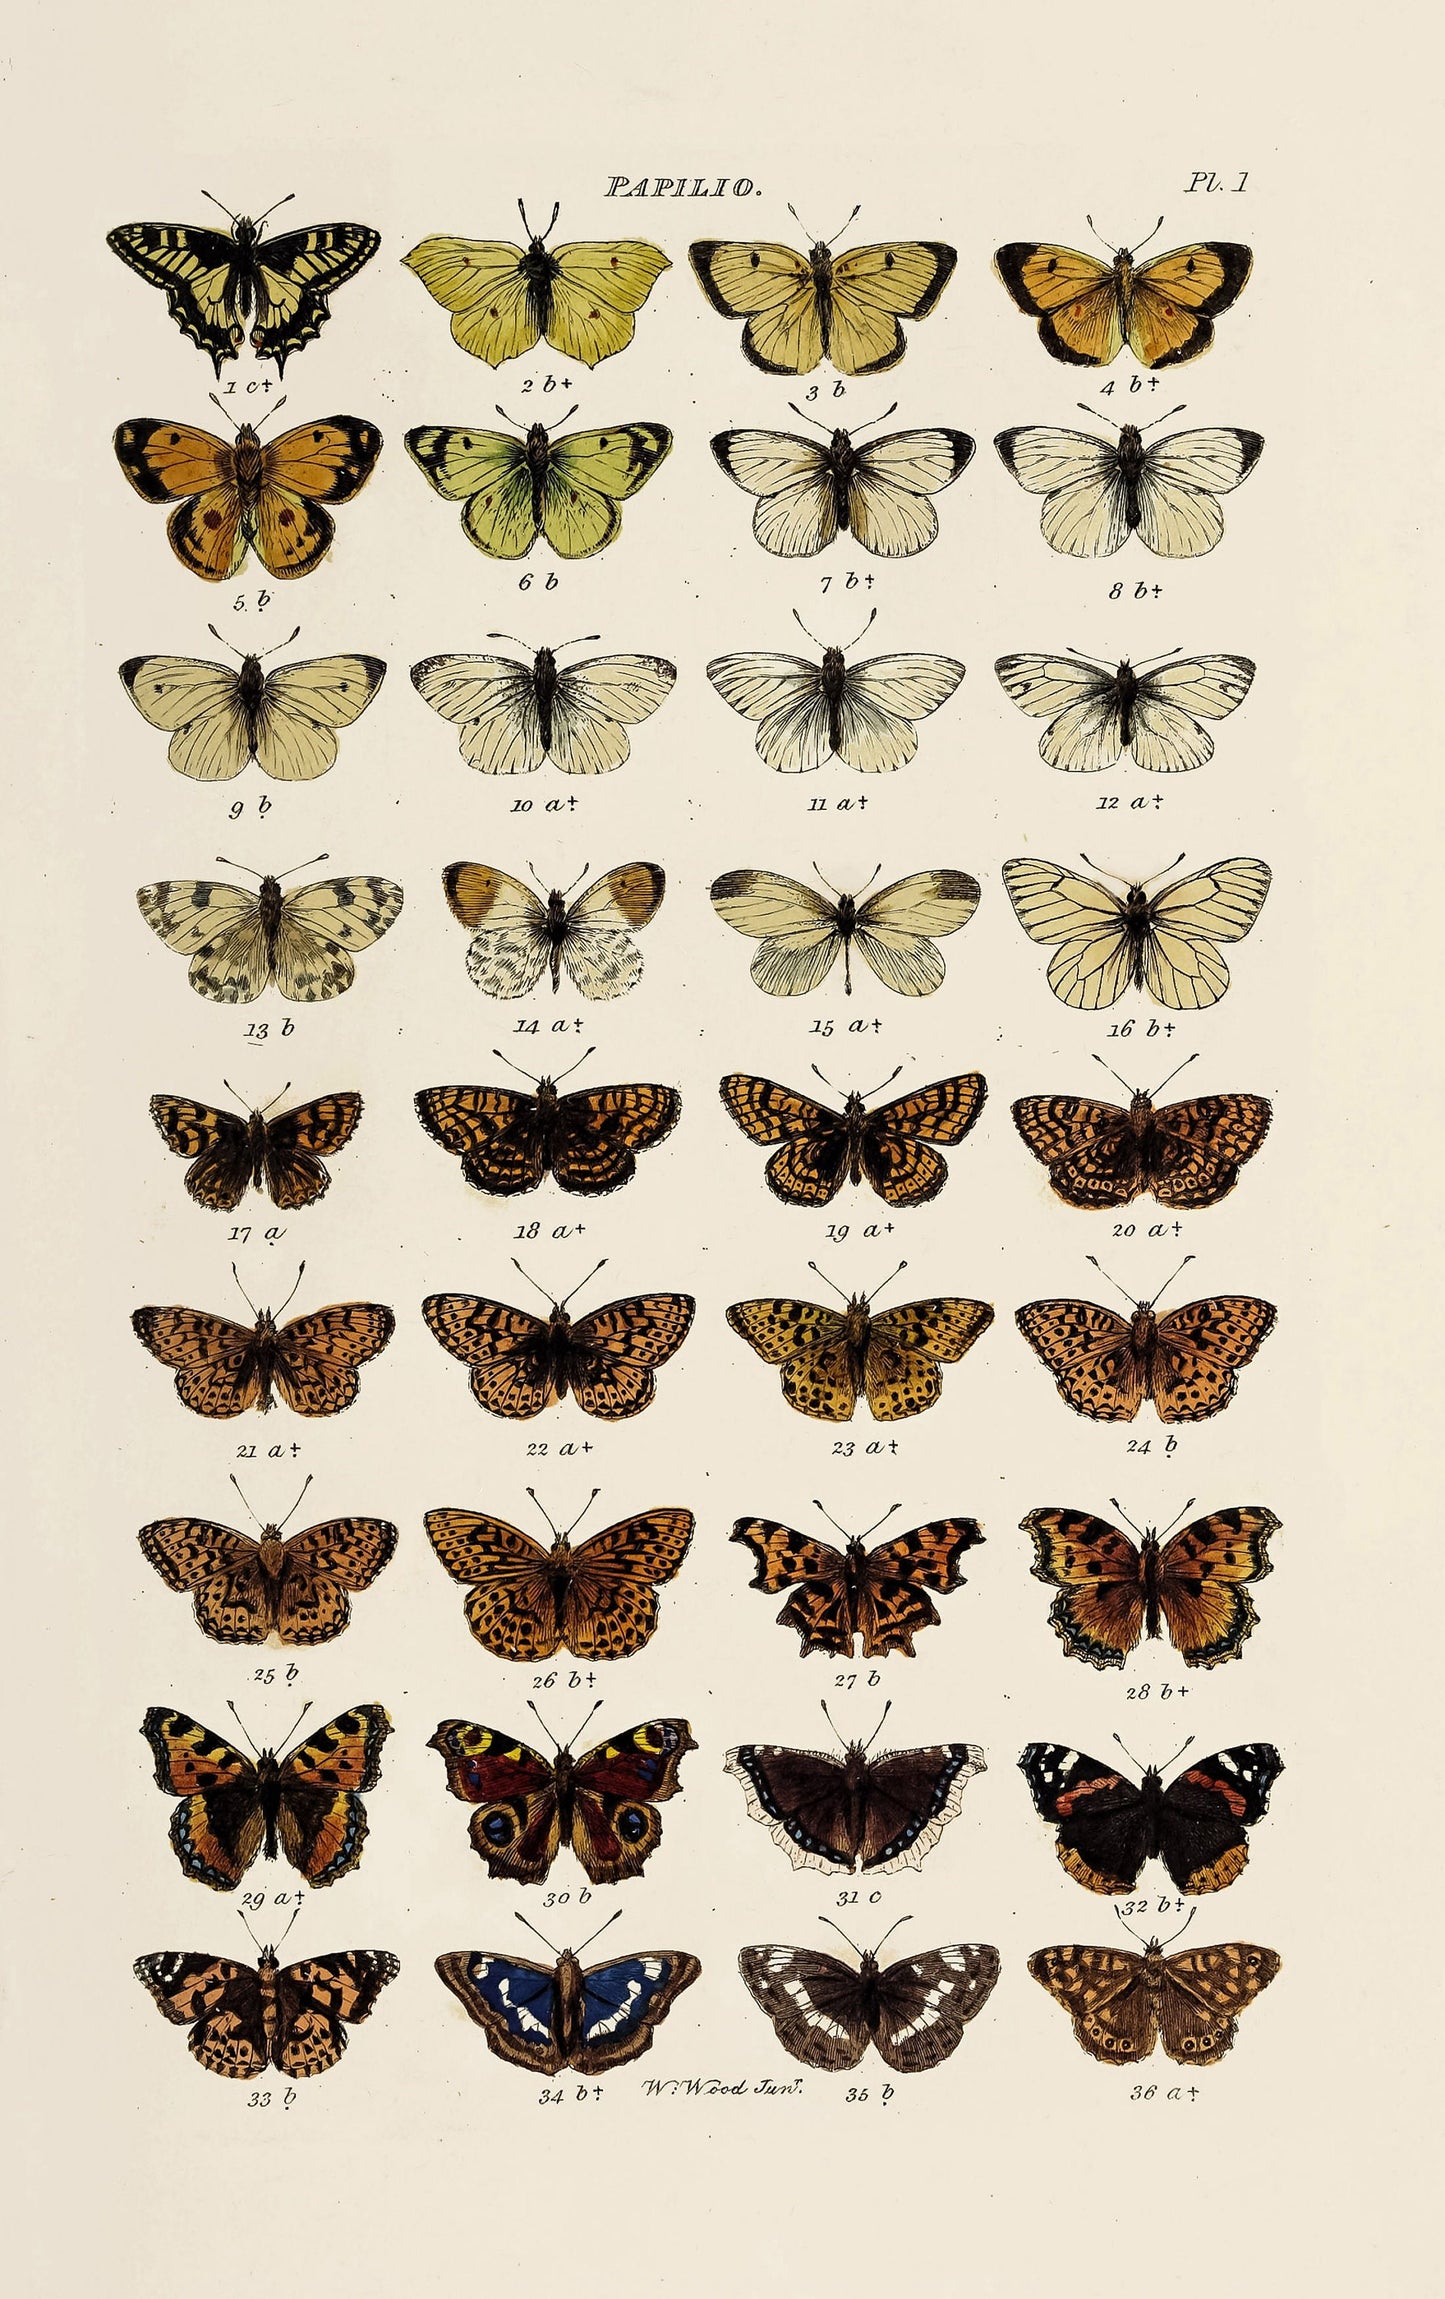 Index Entomological Lepidopterous Insects of Great Britain [59 Images]